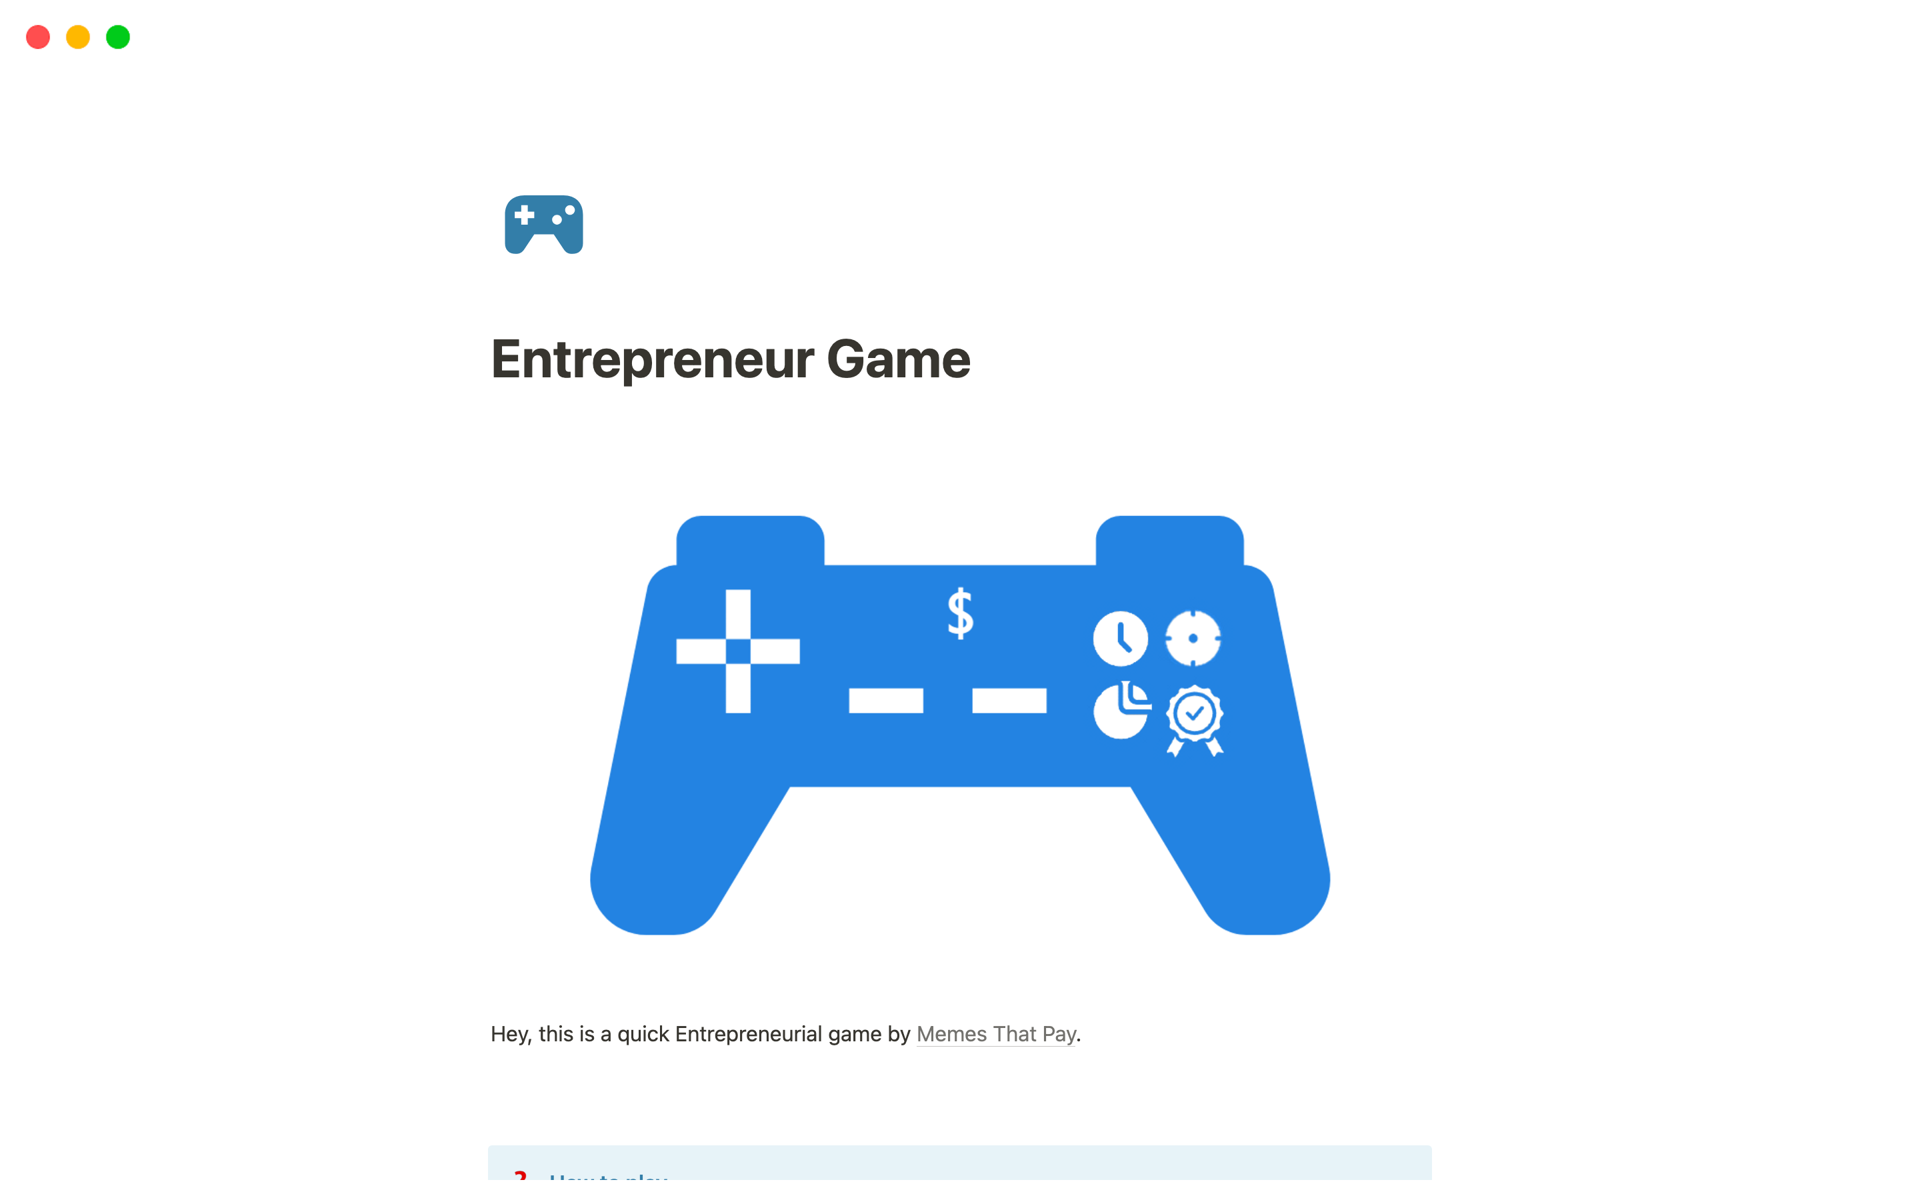 Have some fun in your downtime by playing a simple puzzle & word game made for entrepreneurs entirely on Notion